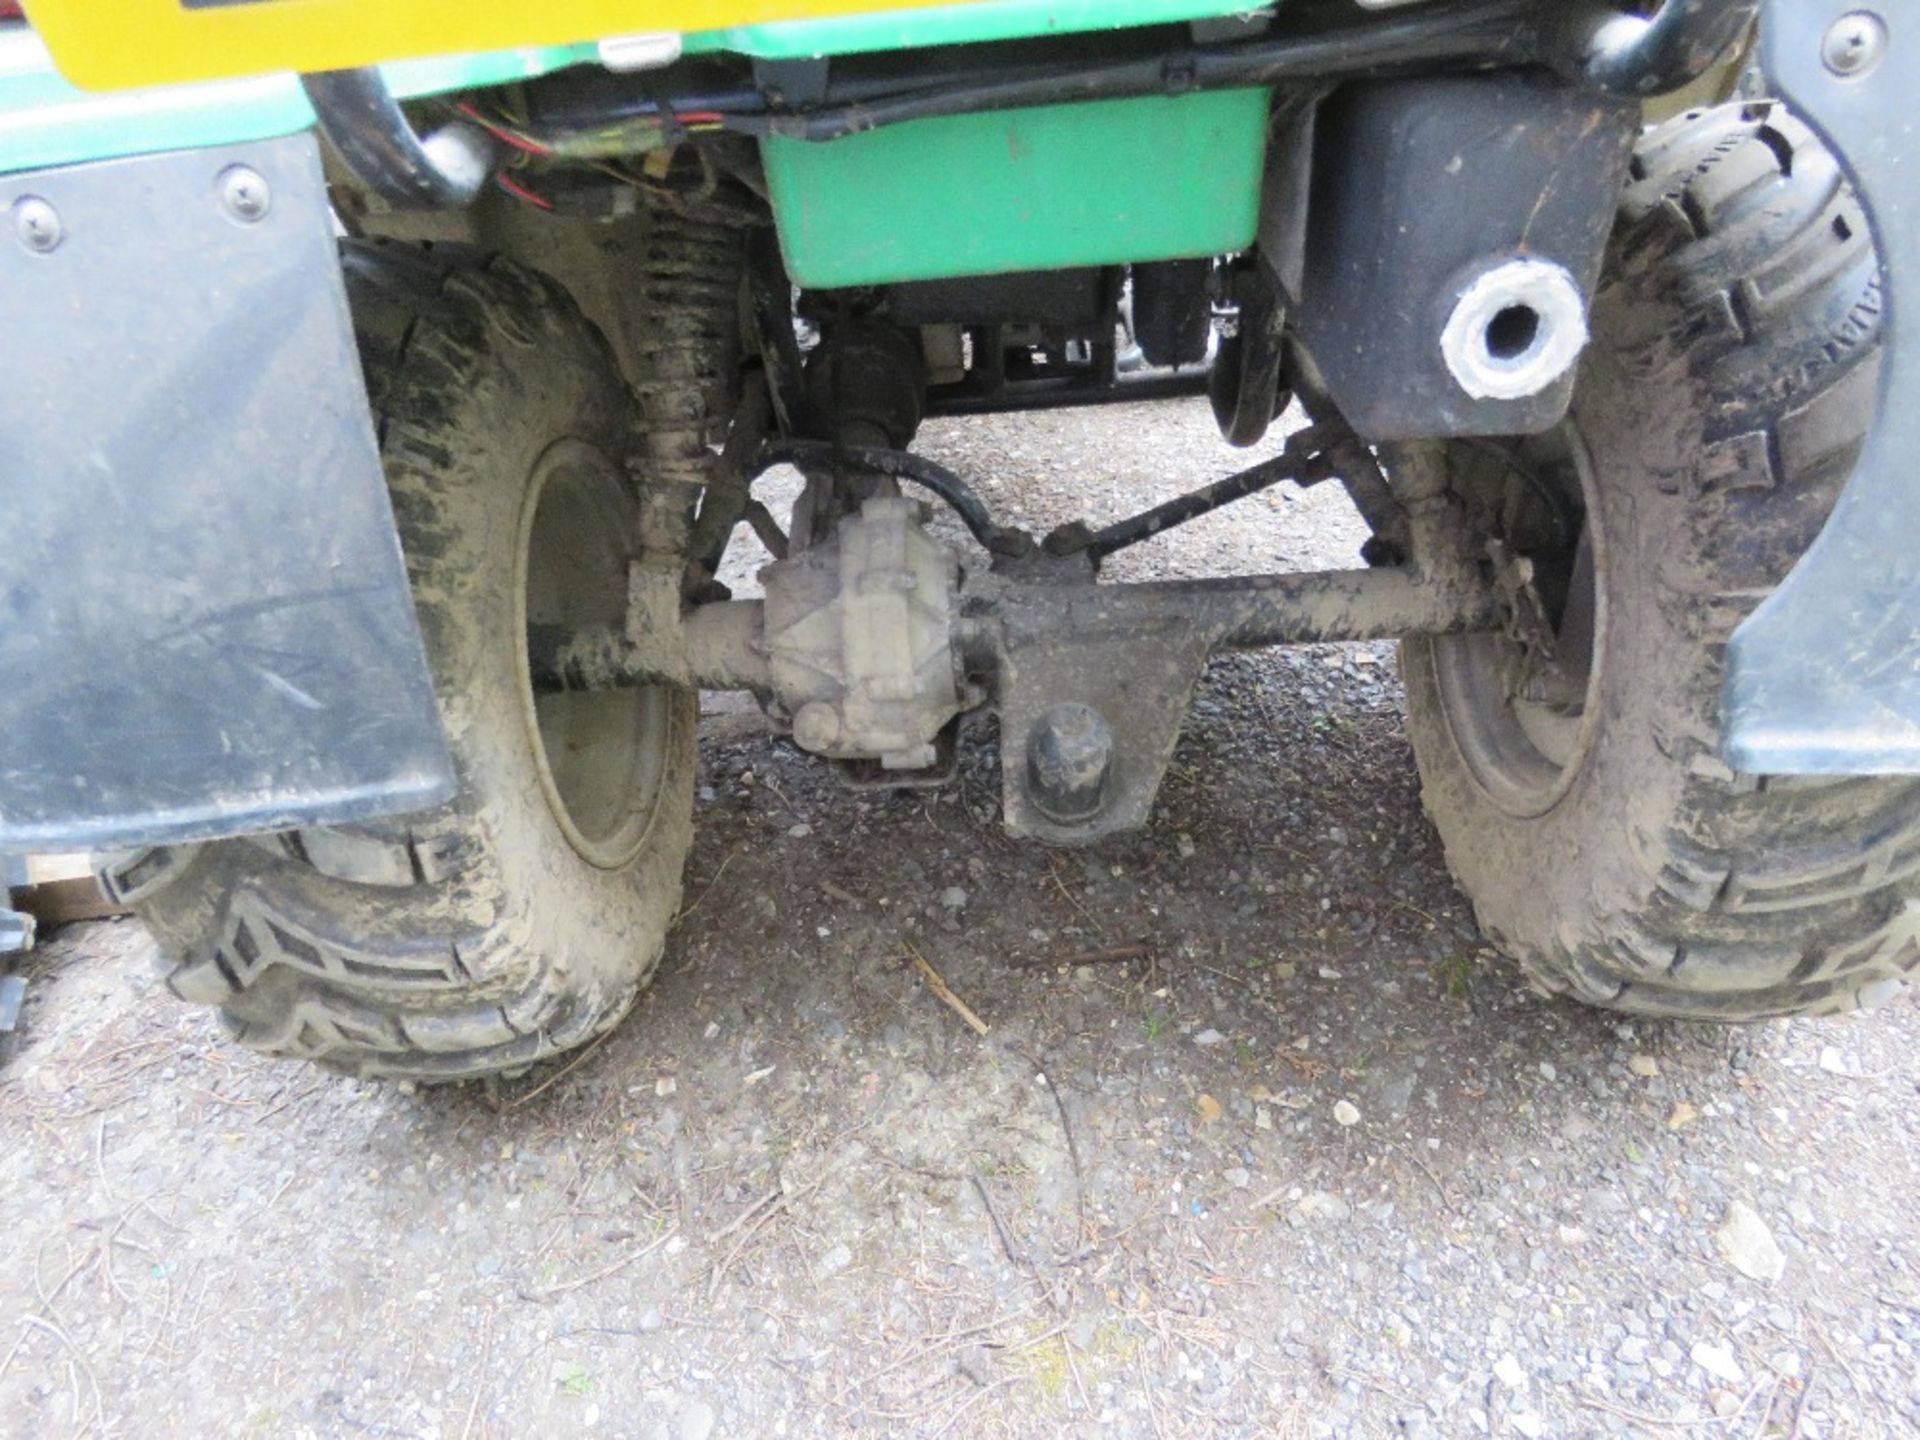 KAWASAKI KLF300 4X4 4WD PETROL ENGINED QUAD BIKE, TURNS OVER BUT NOT STARTING, CONDITION UNKNOWN, SO - Image 5 of 8